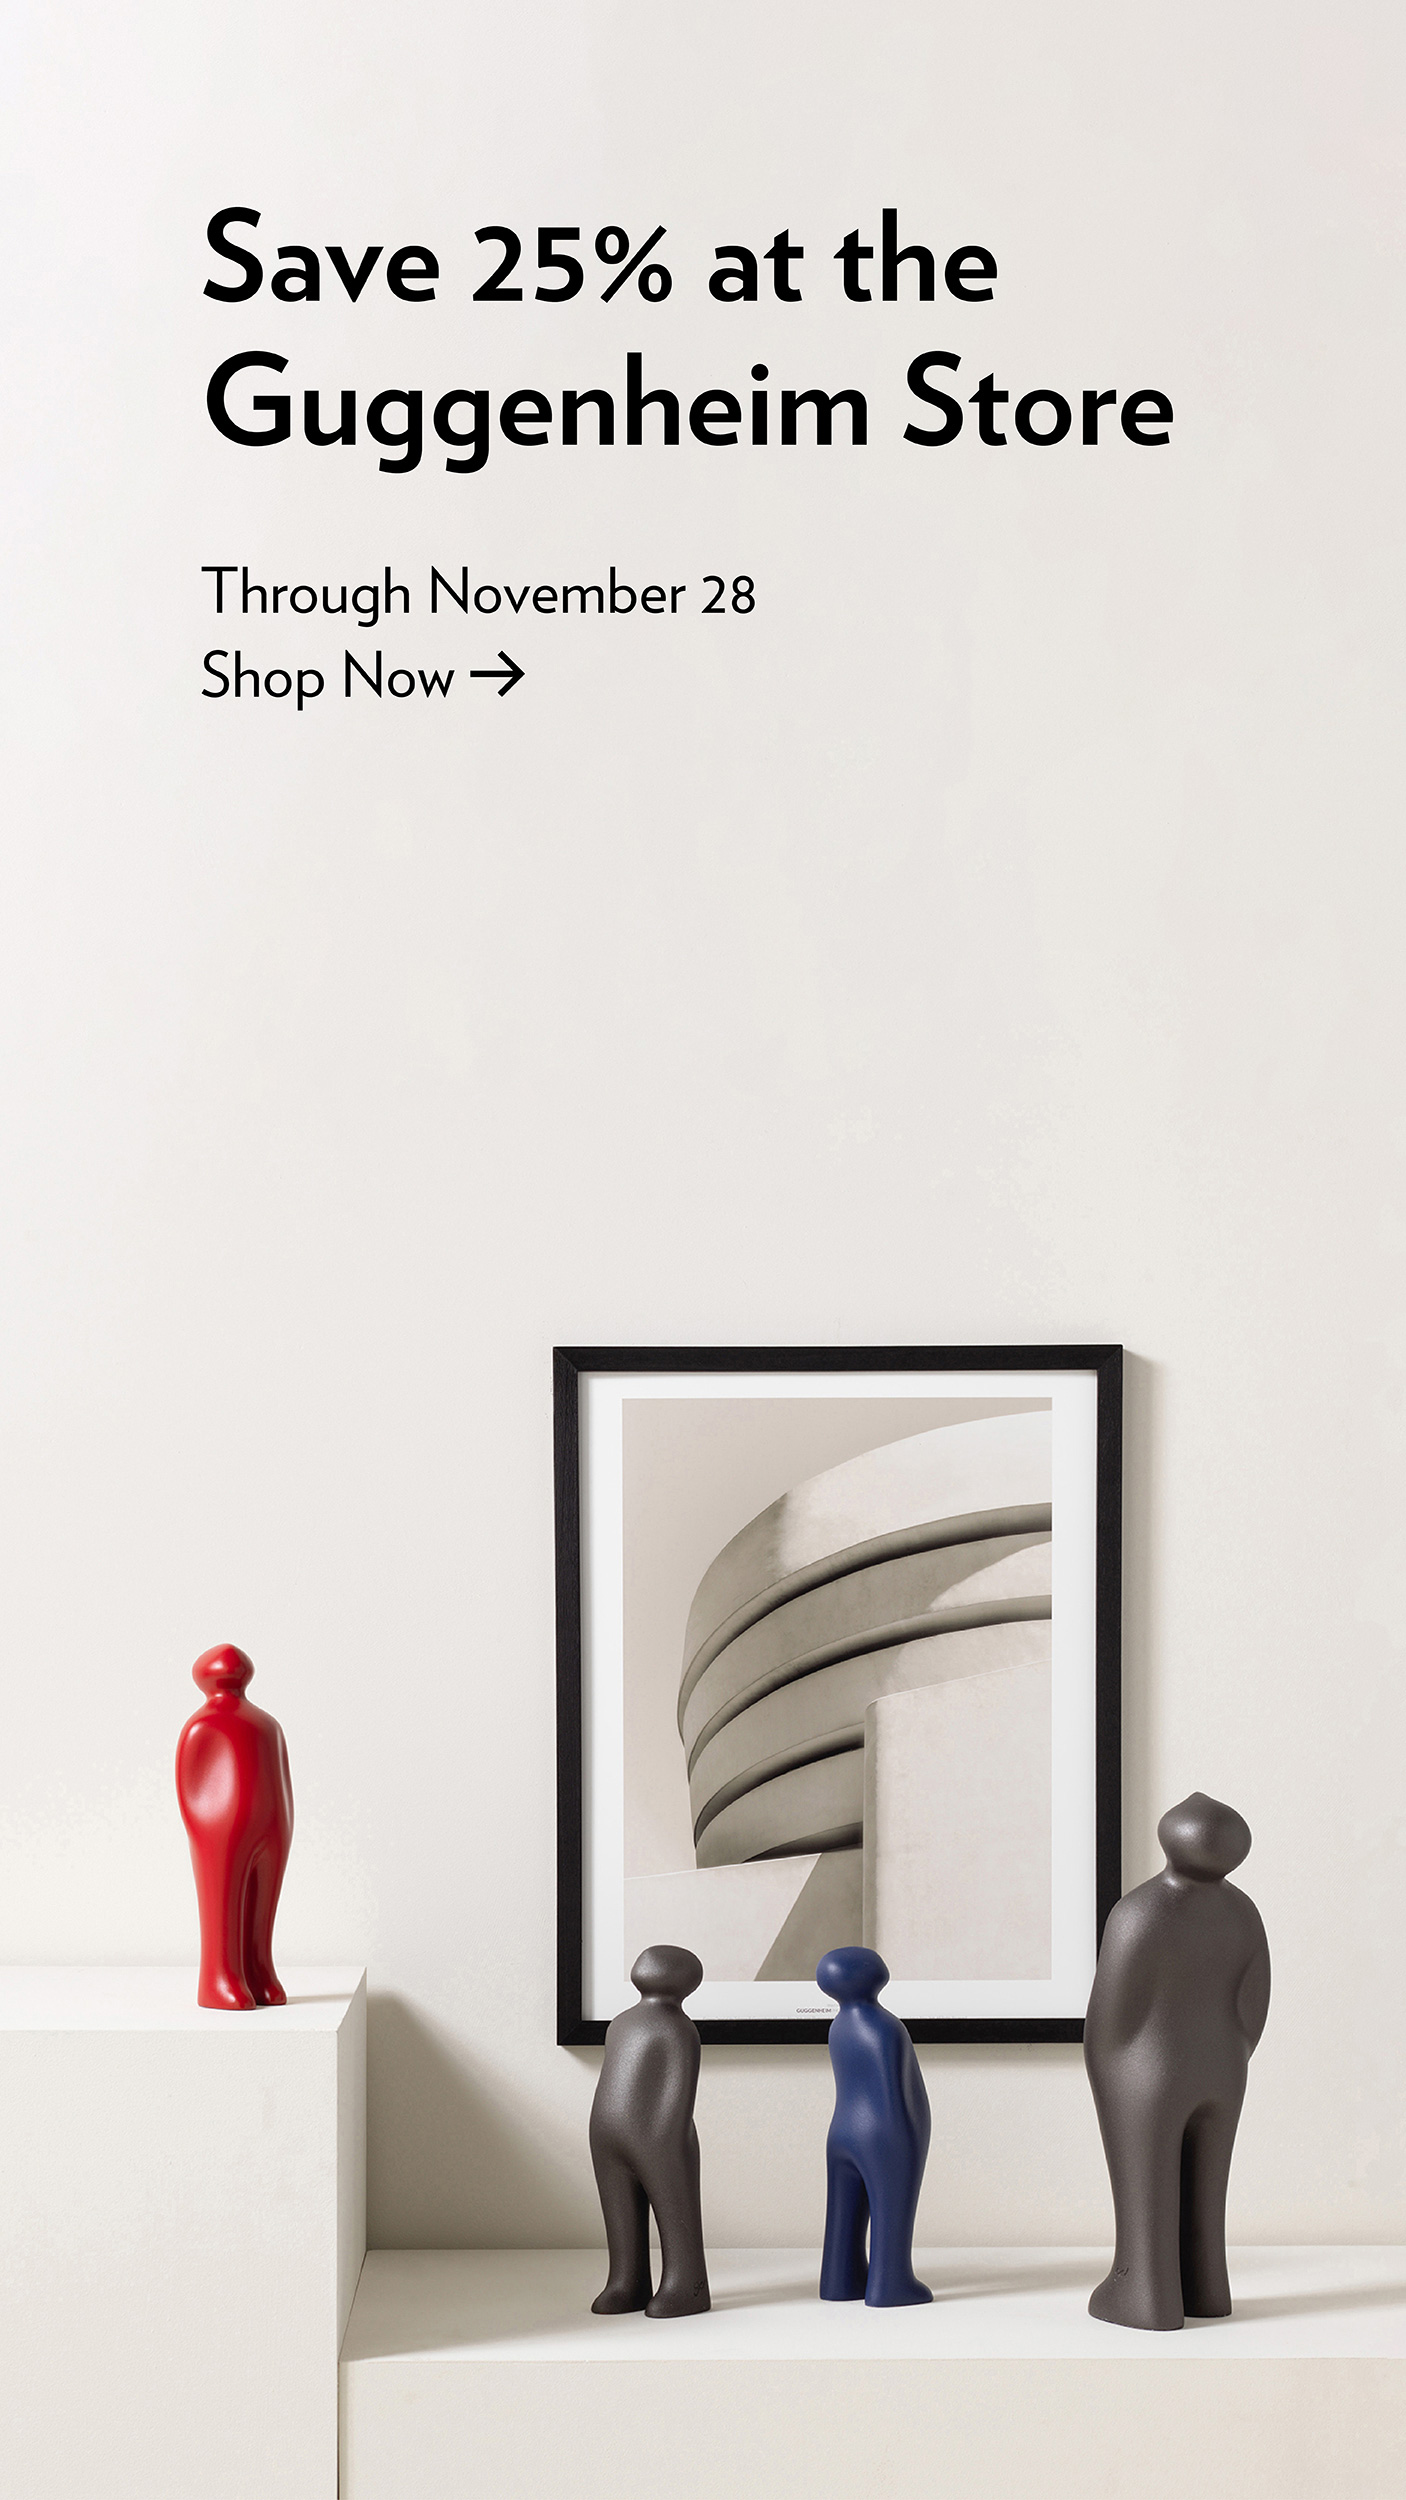 Small sculptures of museum visitors looking up at a picture of the Guggenheim Museum with the text Save 25% at the Guggenheim Store through November 28 Shop Now